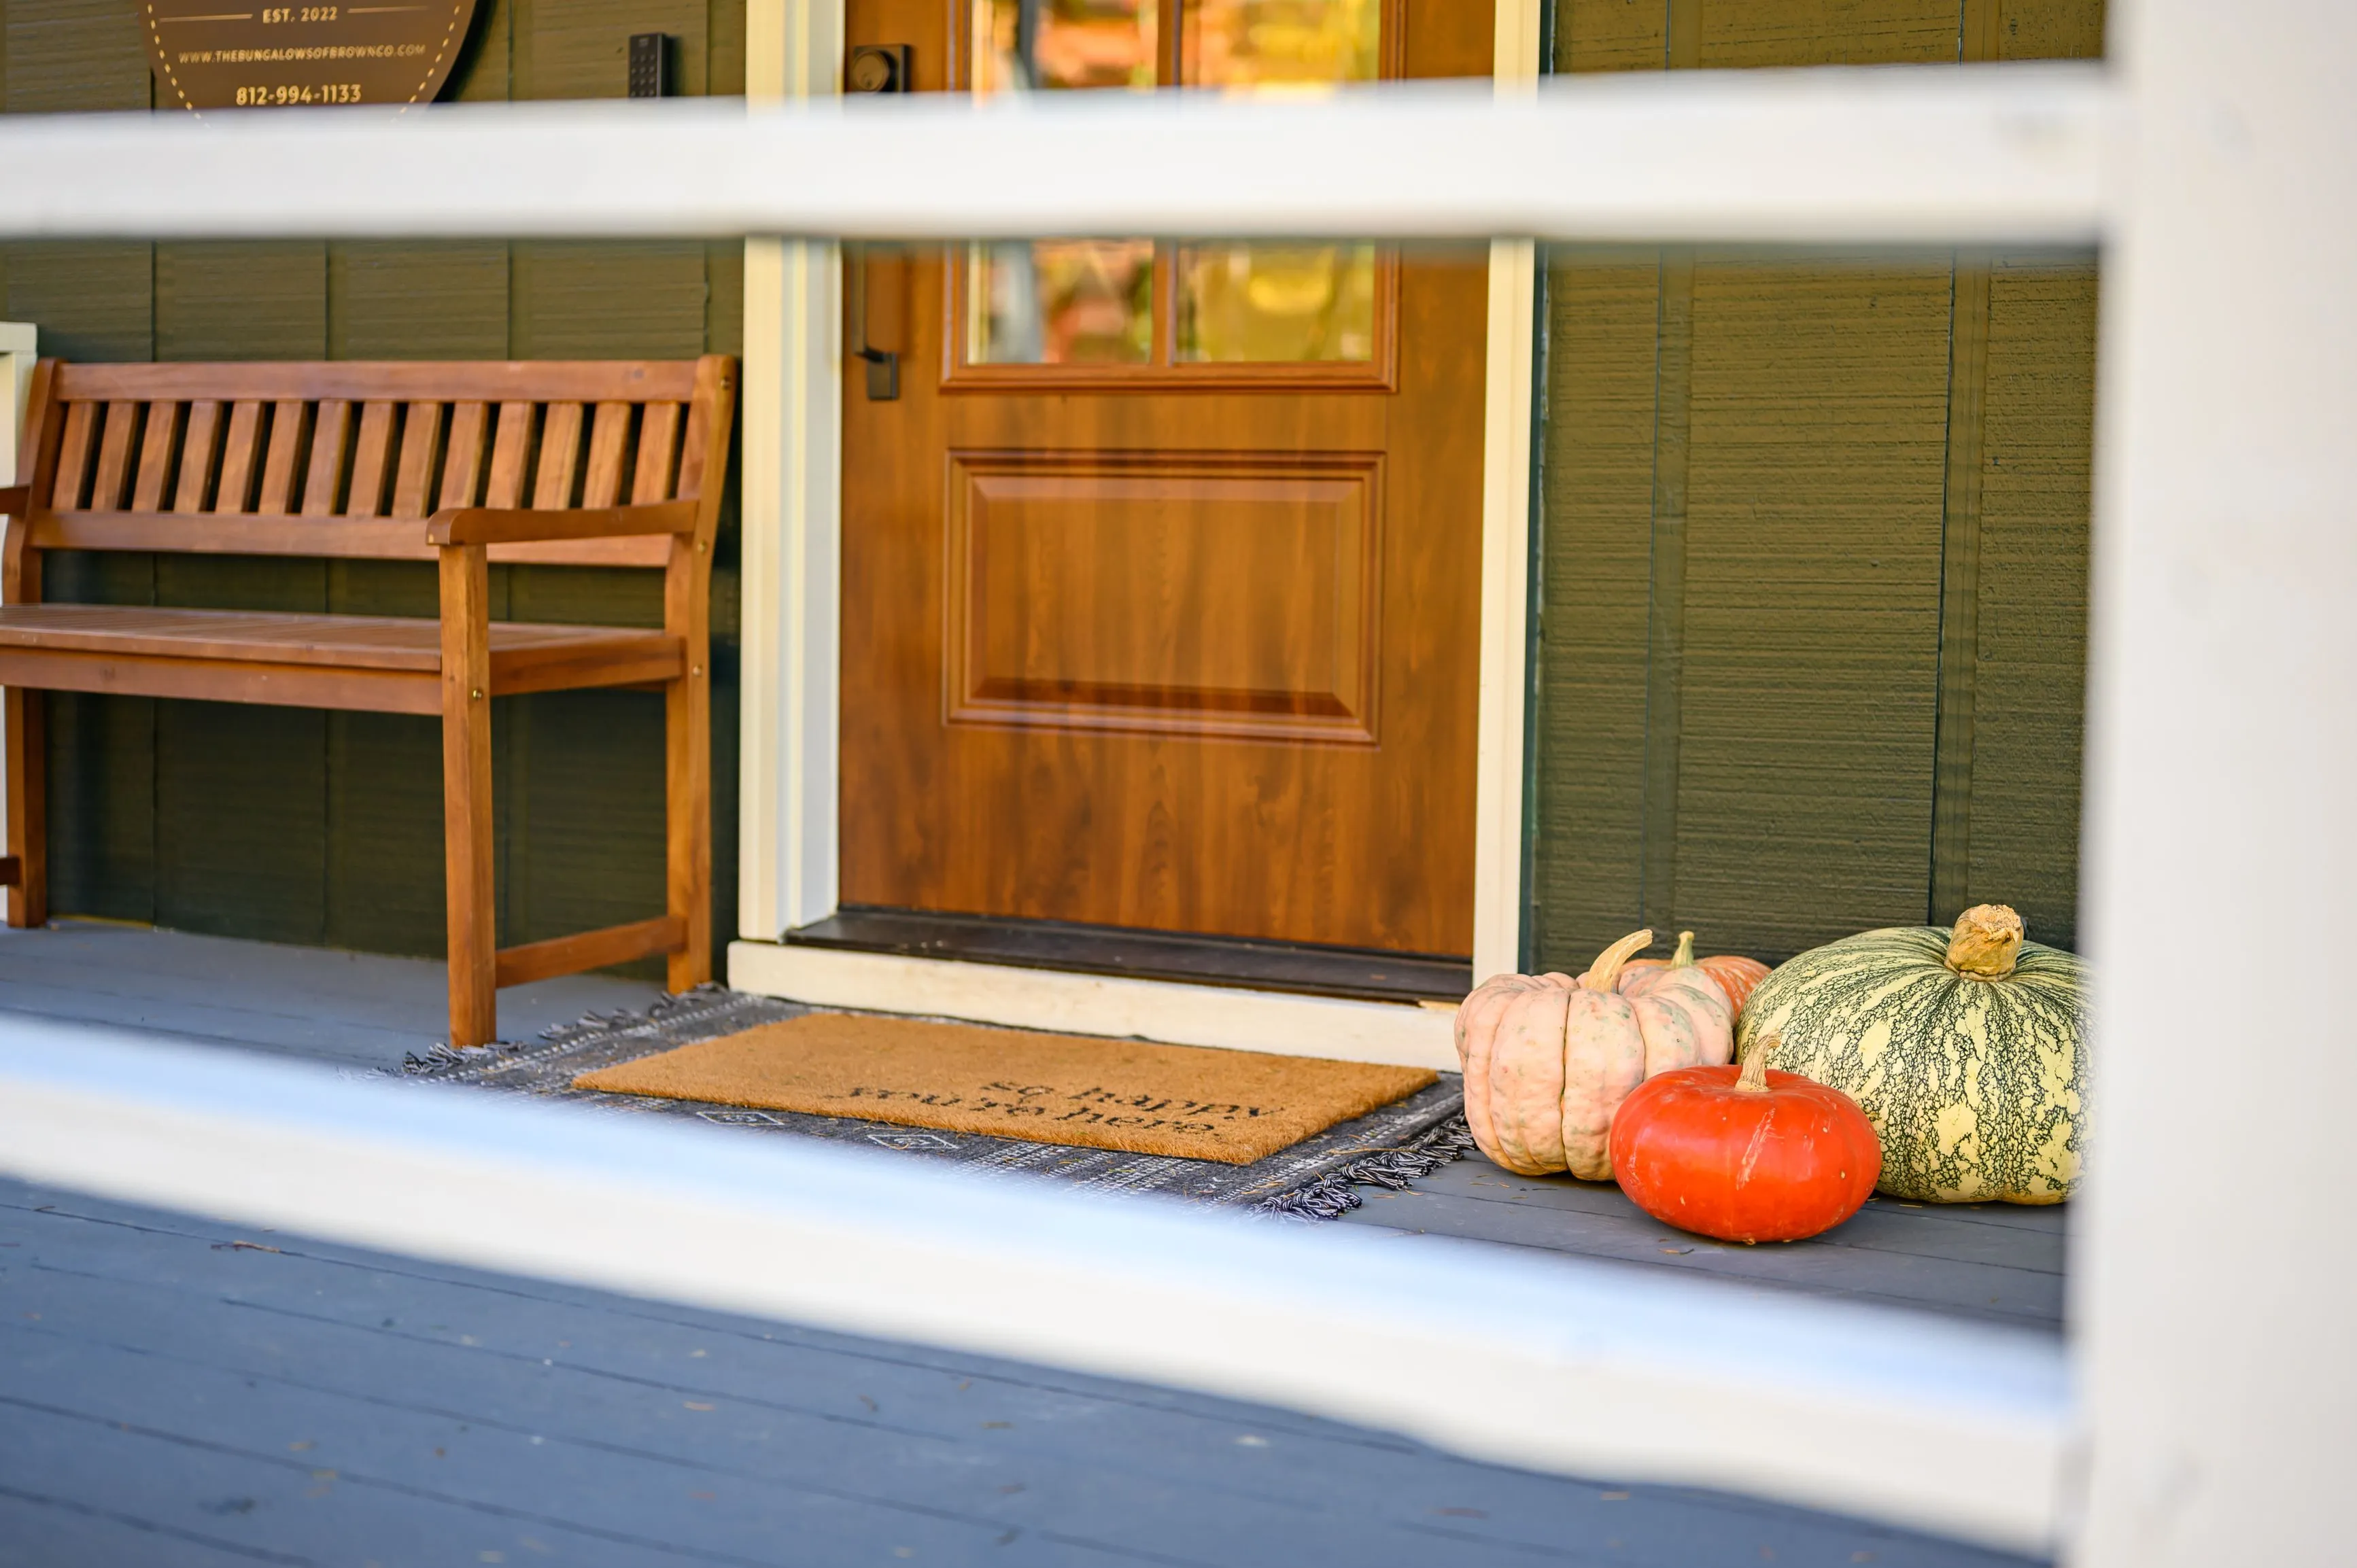 A cozy front porch view with a wooden bench next to a door, decorated with a variety of pumpkins on the ground.